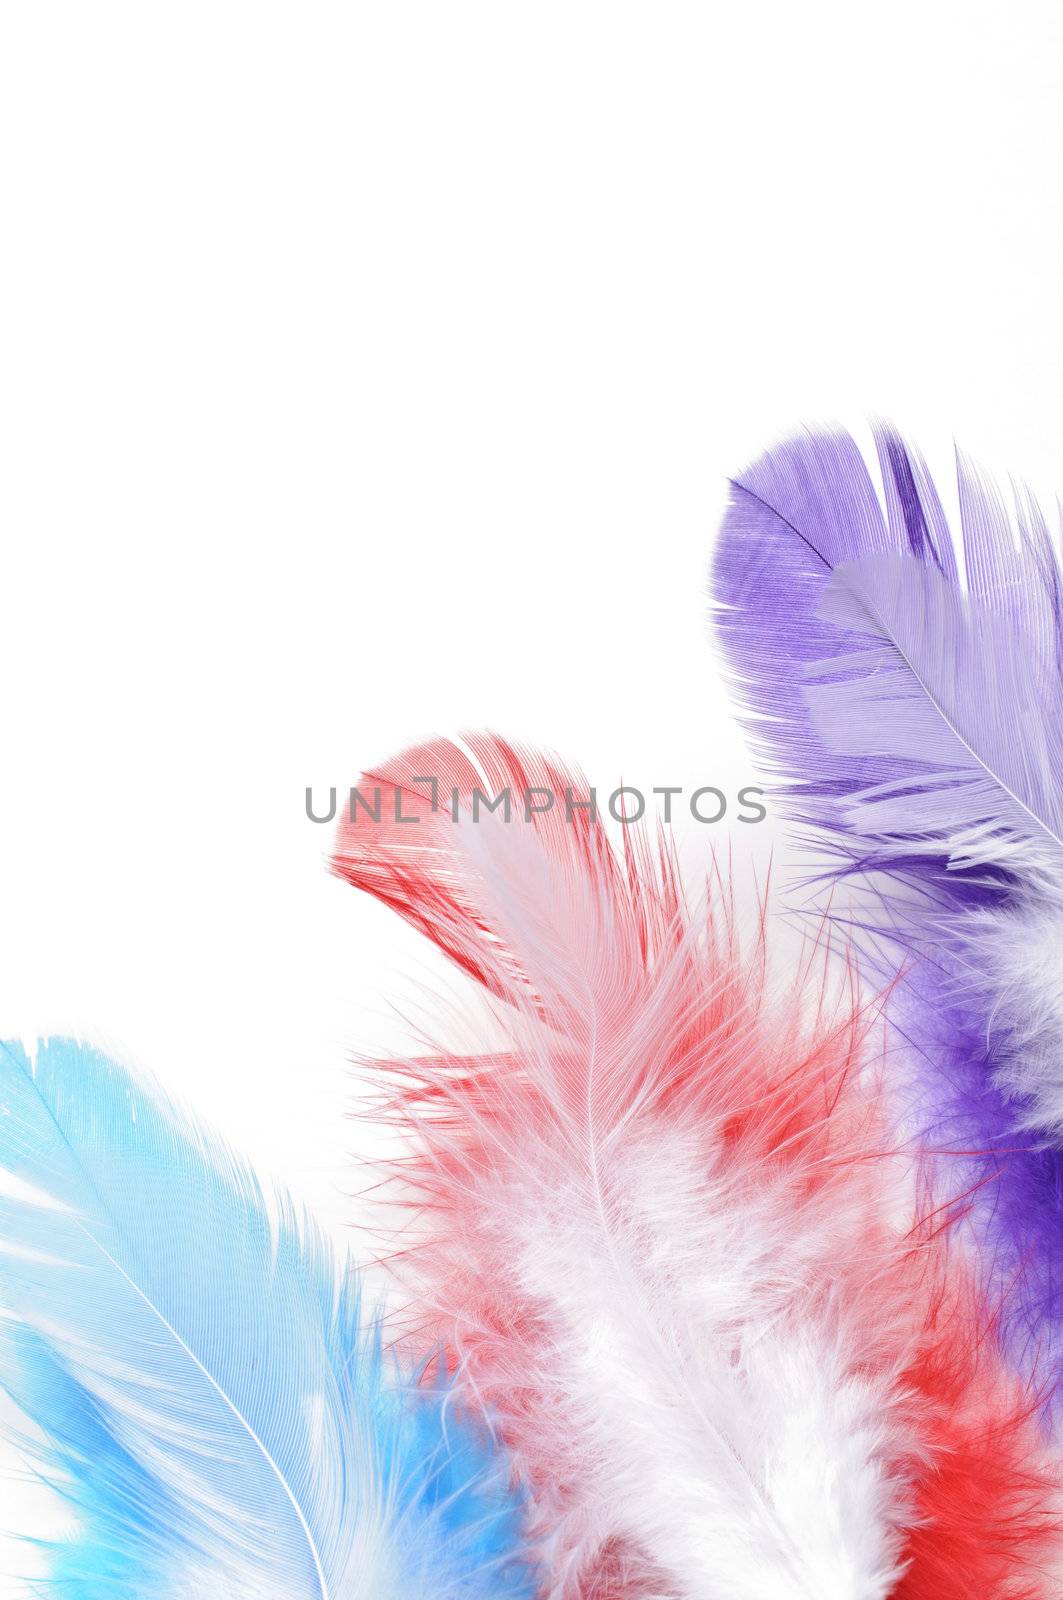 Colorful feathers on white background